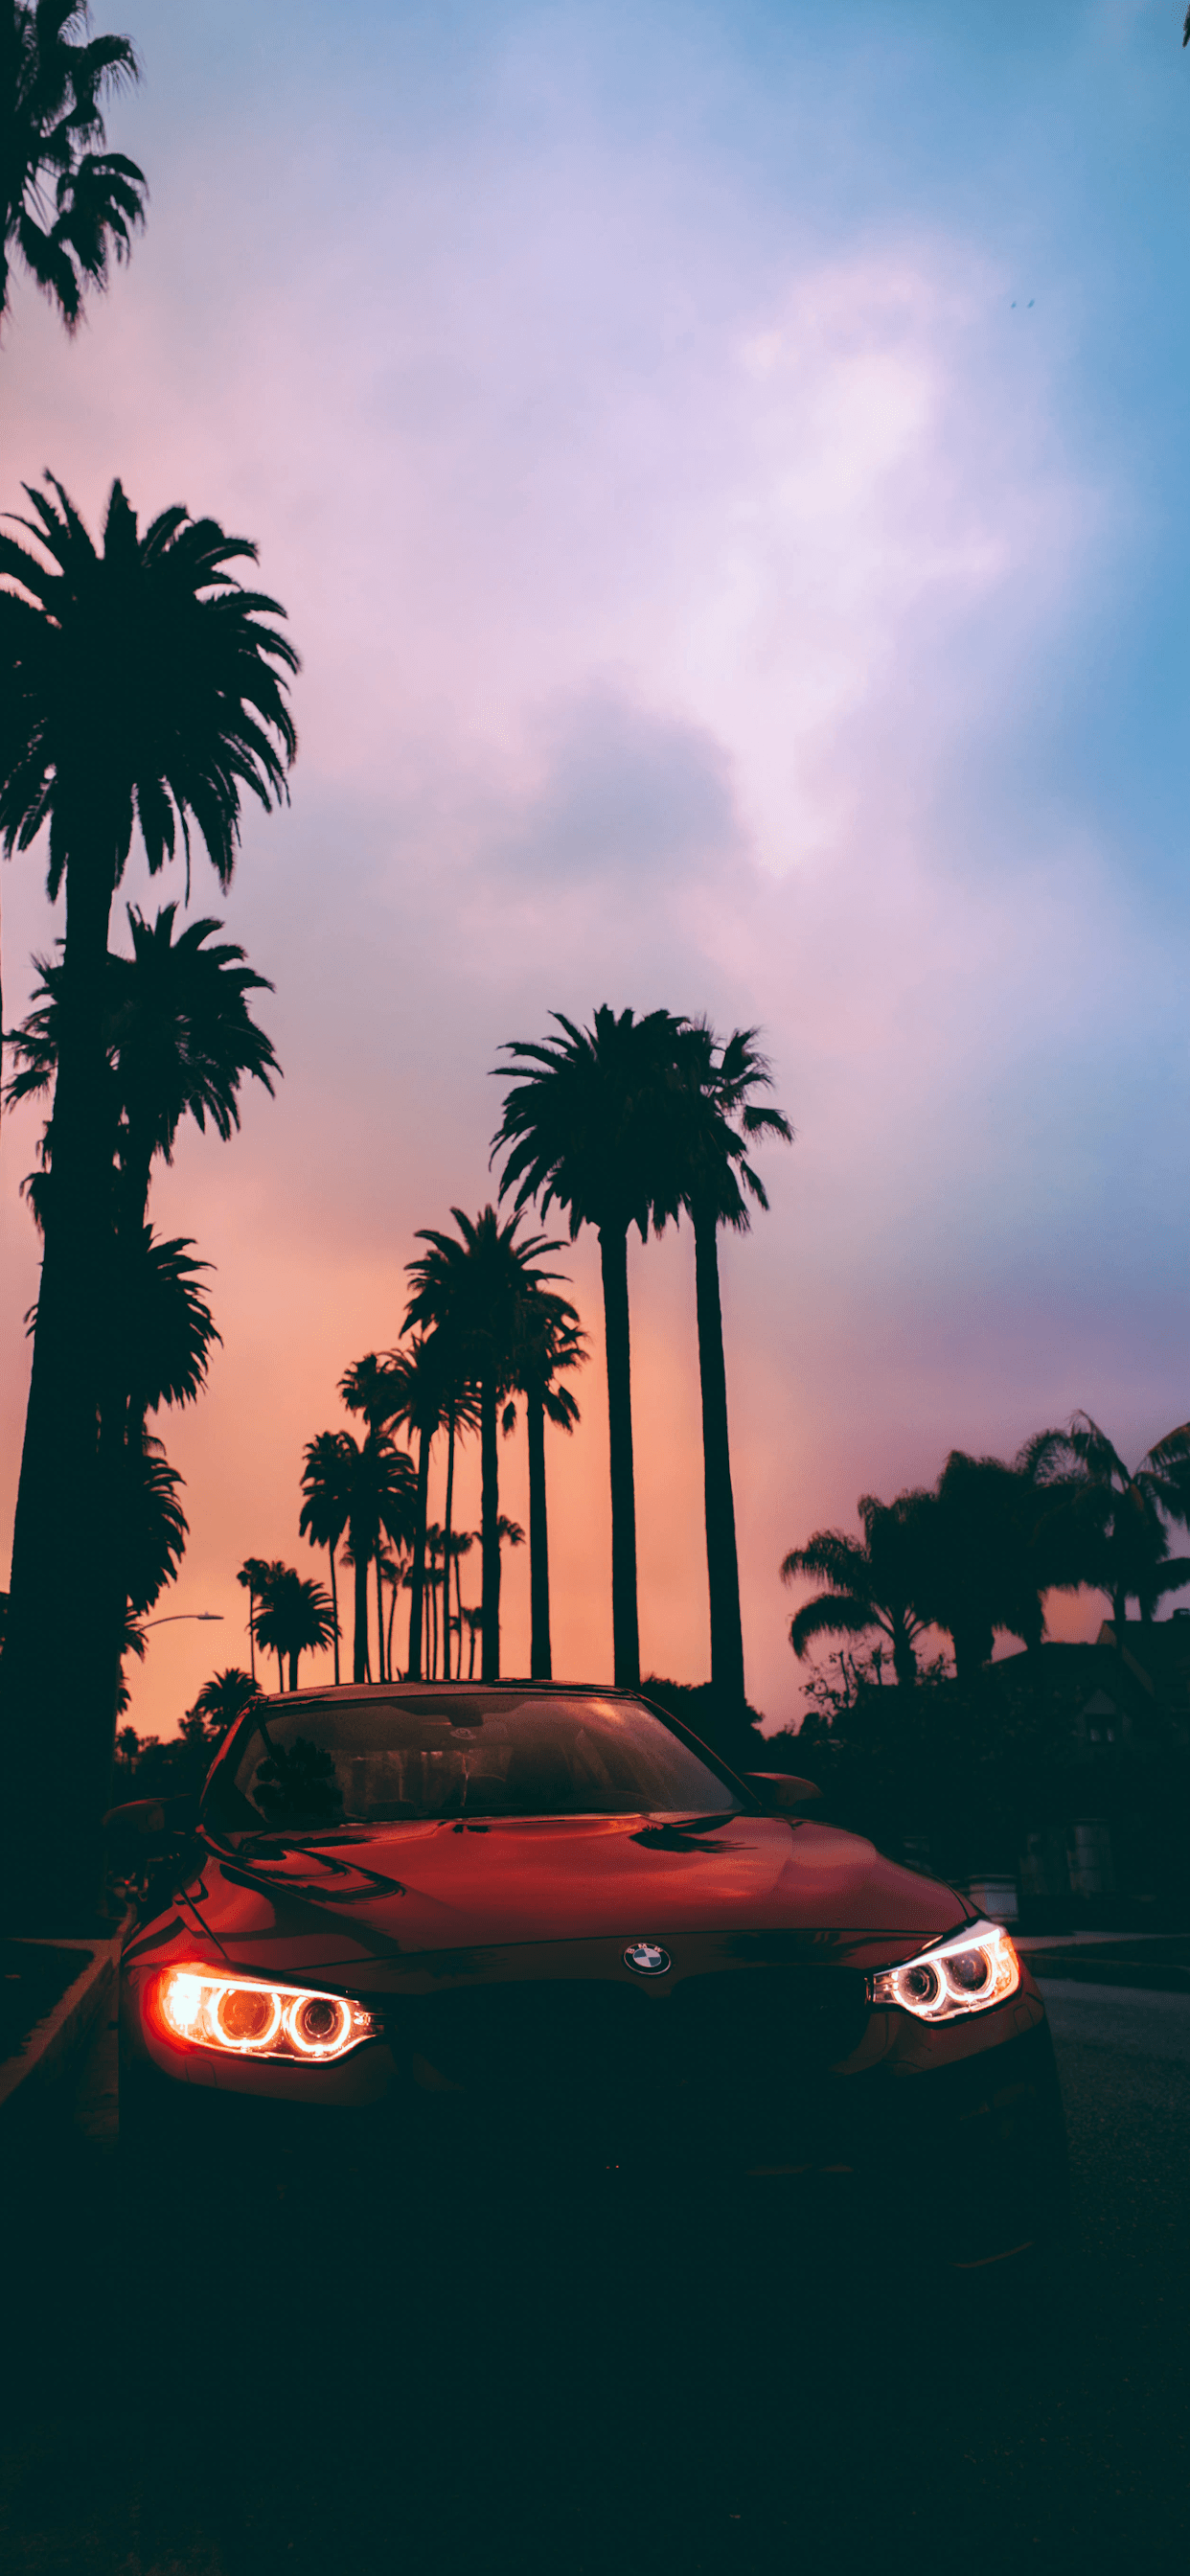 Wallpaper For Iphone X Cars